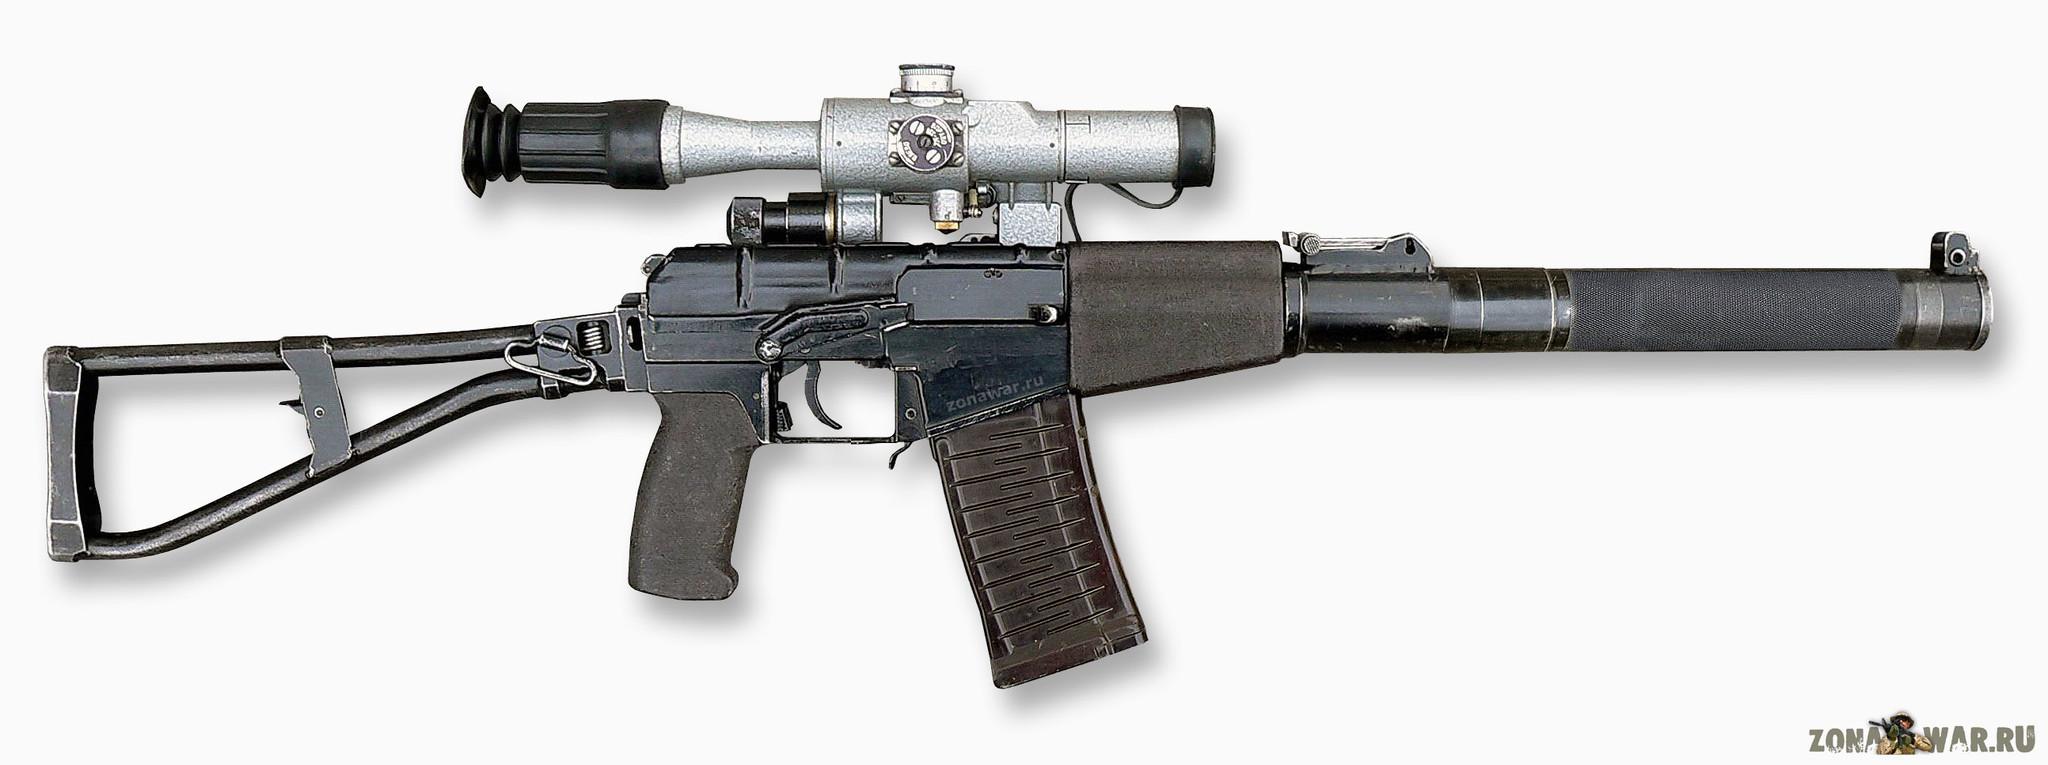 AS assault rifle special